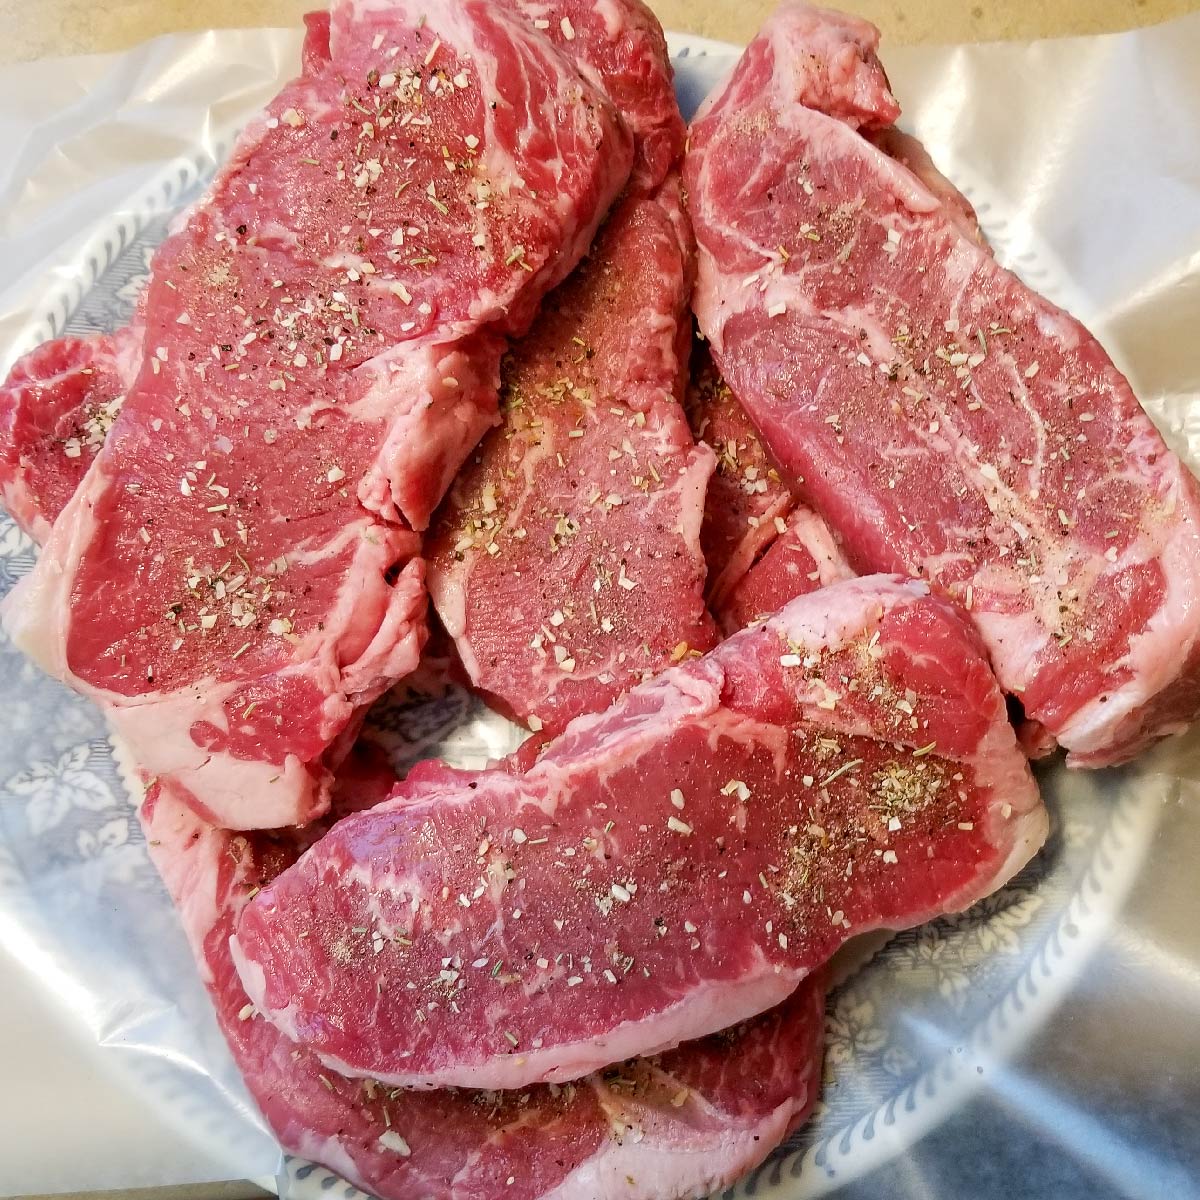 Steaks coated with dry rub sitting on a plate resting before grilling.